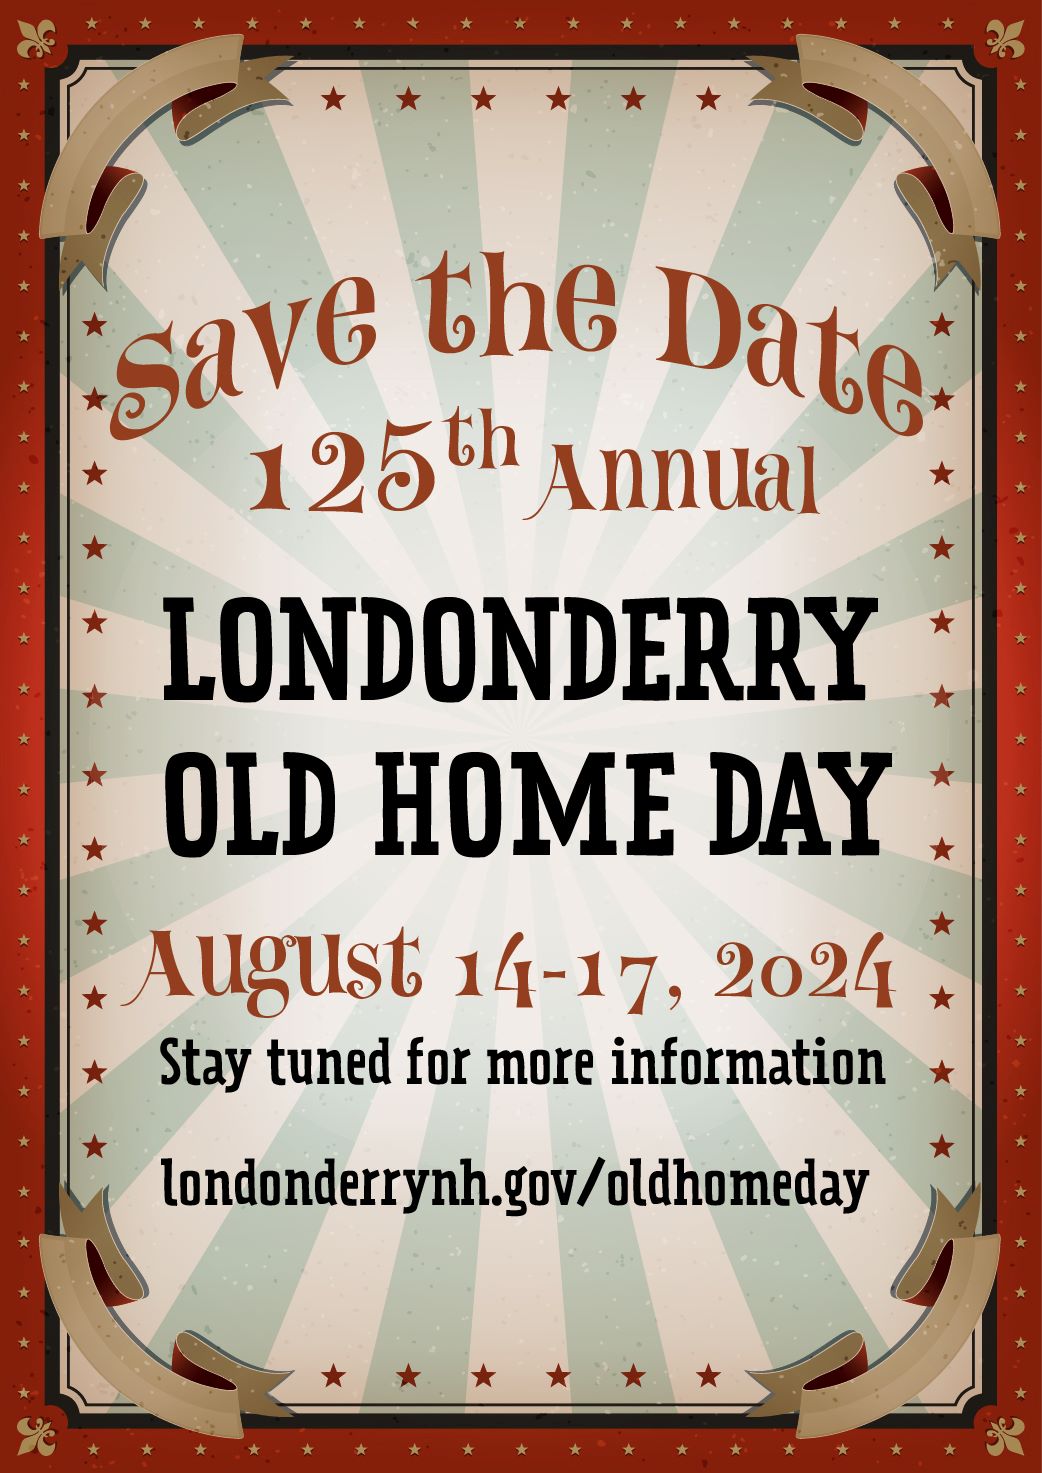 Old Home Dayt Save the Date